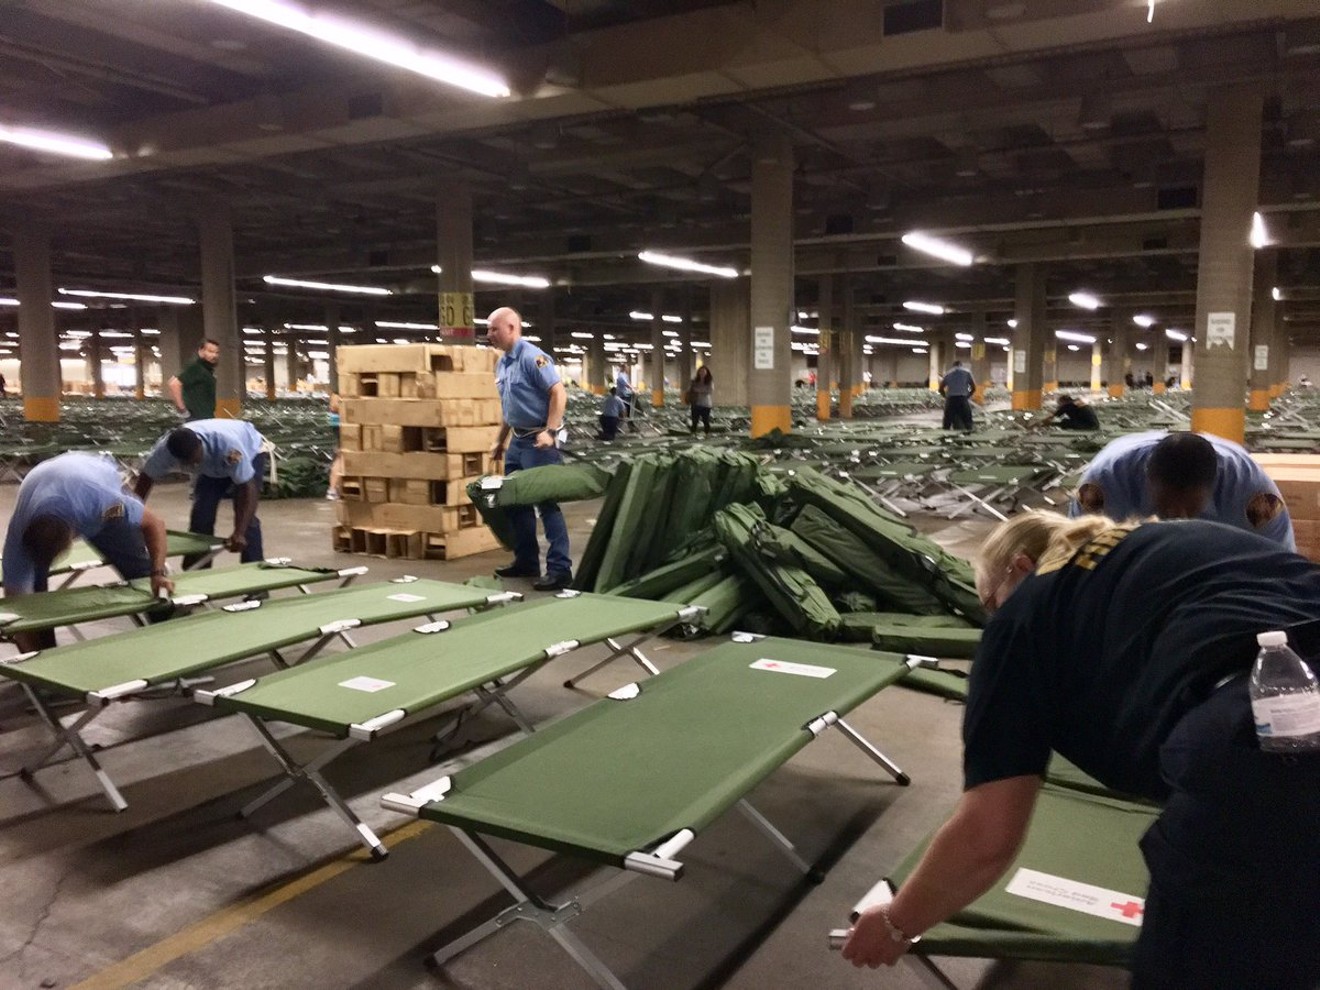 Dallas Fire and Rescue personnel set up cots in the convention center's parking garage.